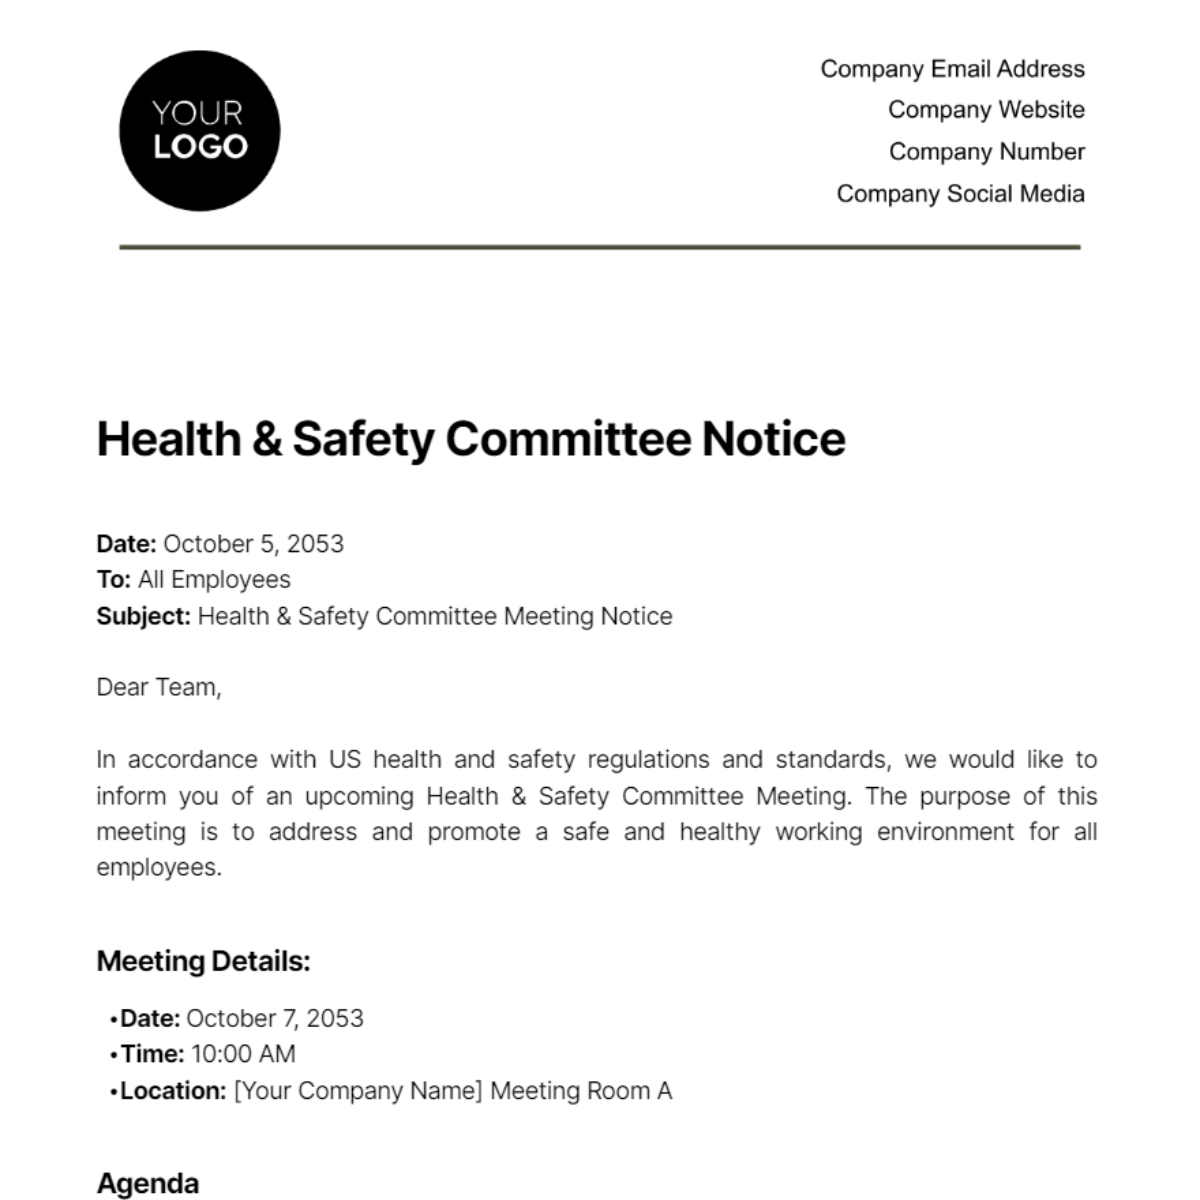 Health & Safety Committee Notice Template